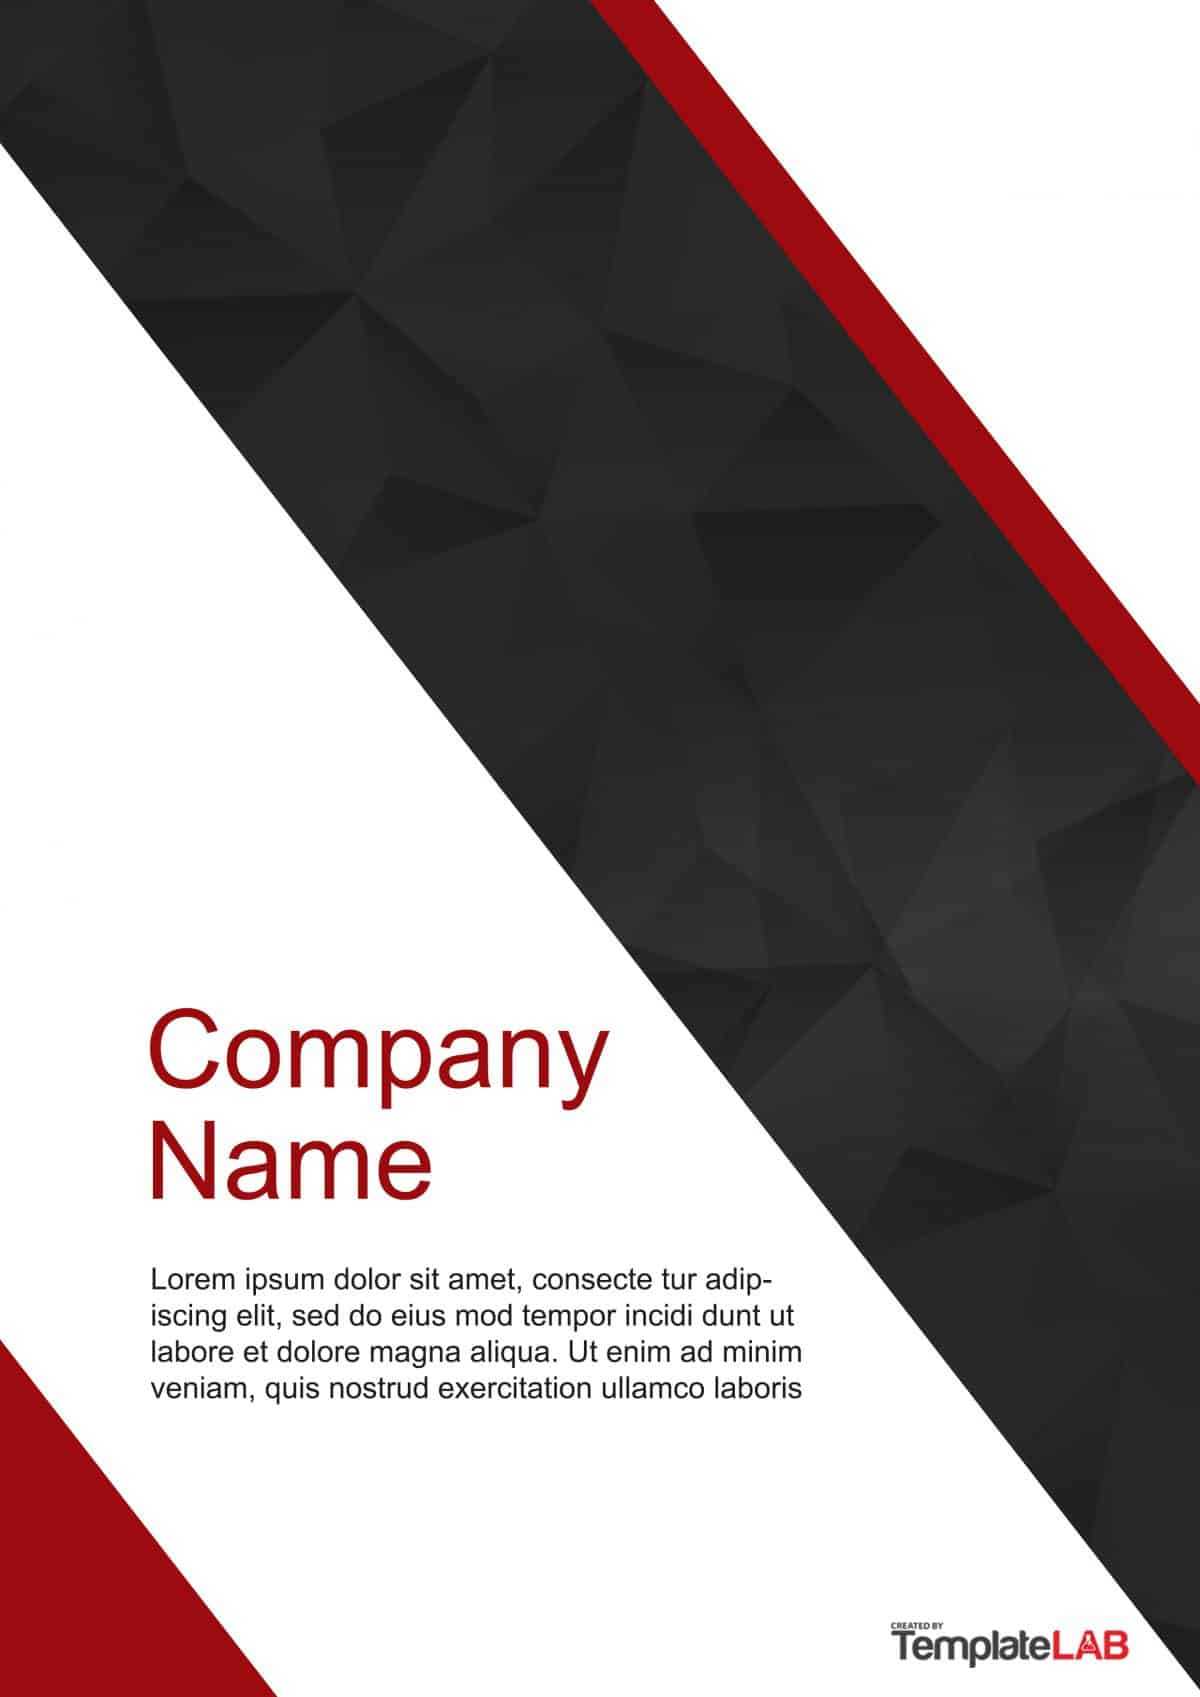 39 Amazing Cover Page Templates (Word + Psd) ᐅ Templatelab Intended For Report Cover Page Template Word